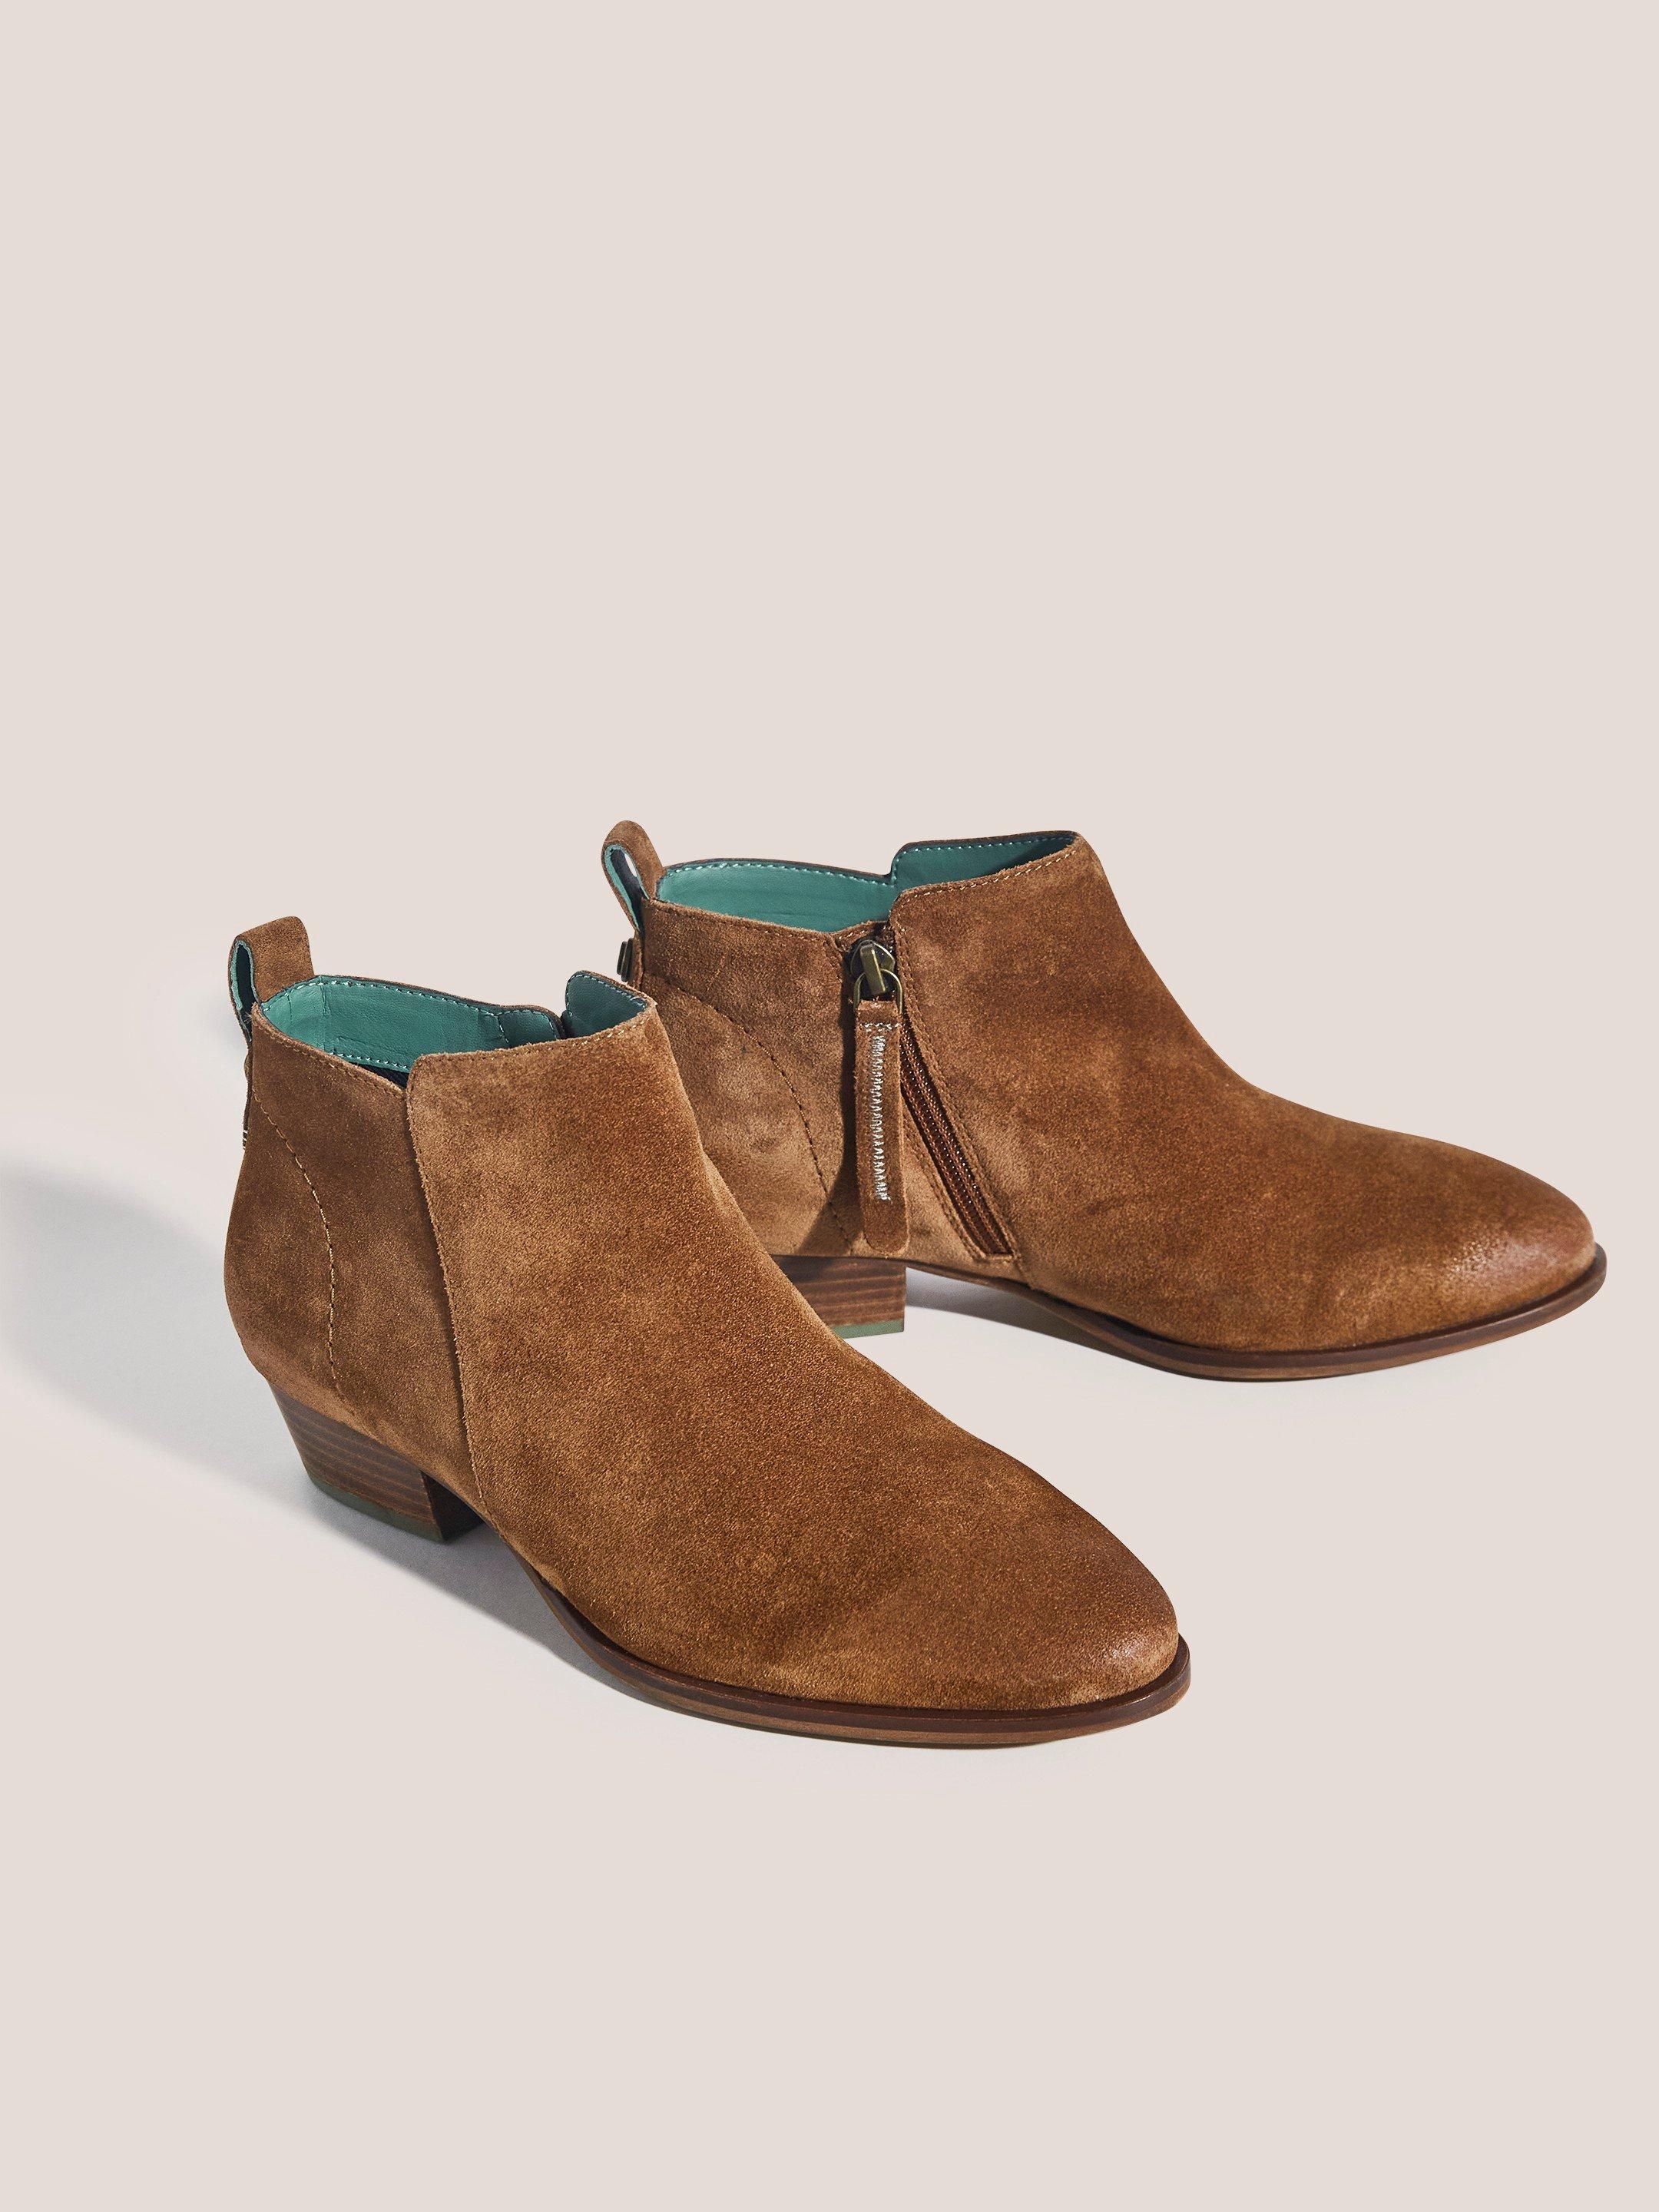 Willow Suede Ankle Boot in DARK TAN - FLAT FRONT